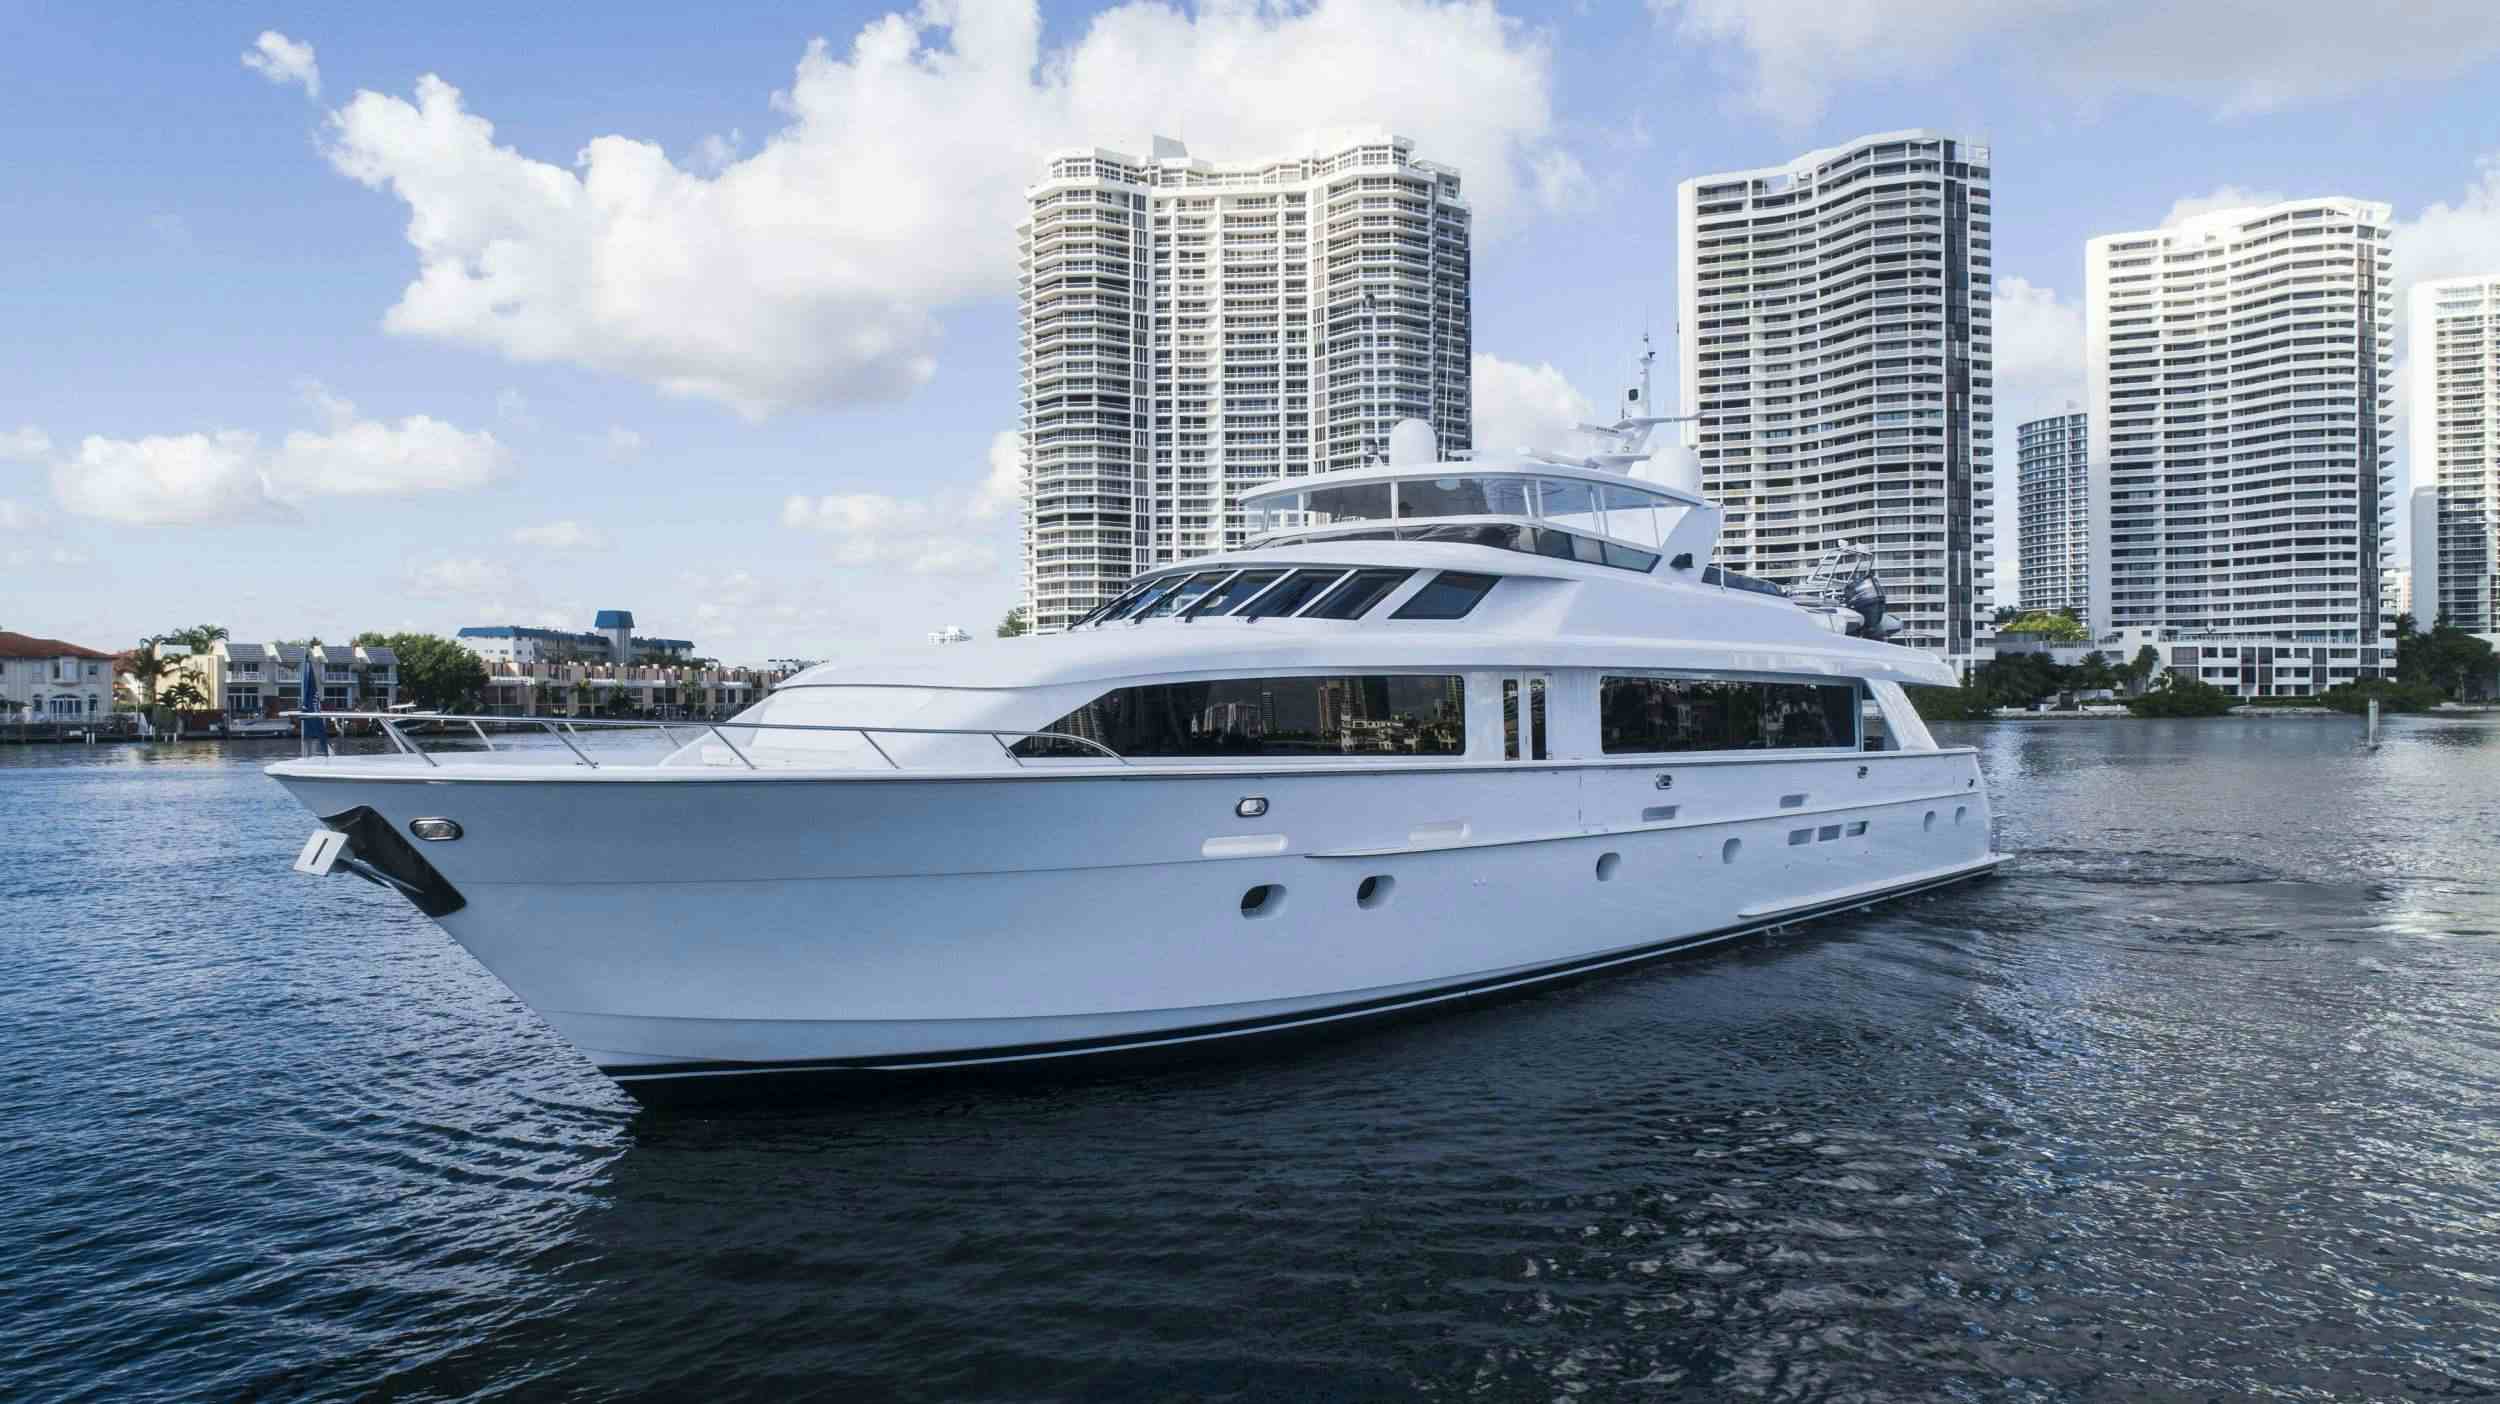 INEVITABLE - Yacht Charter Fort Lauderdale & Boat hire in US East Coast & Bahamas 1